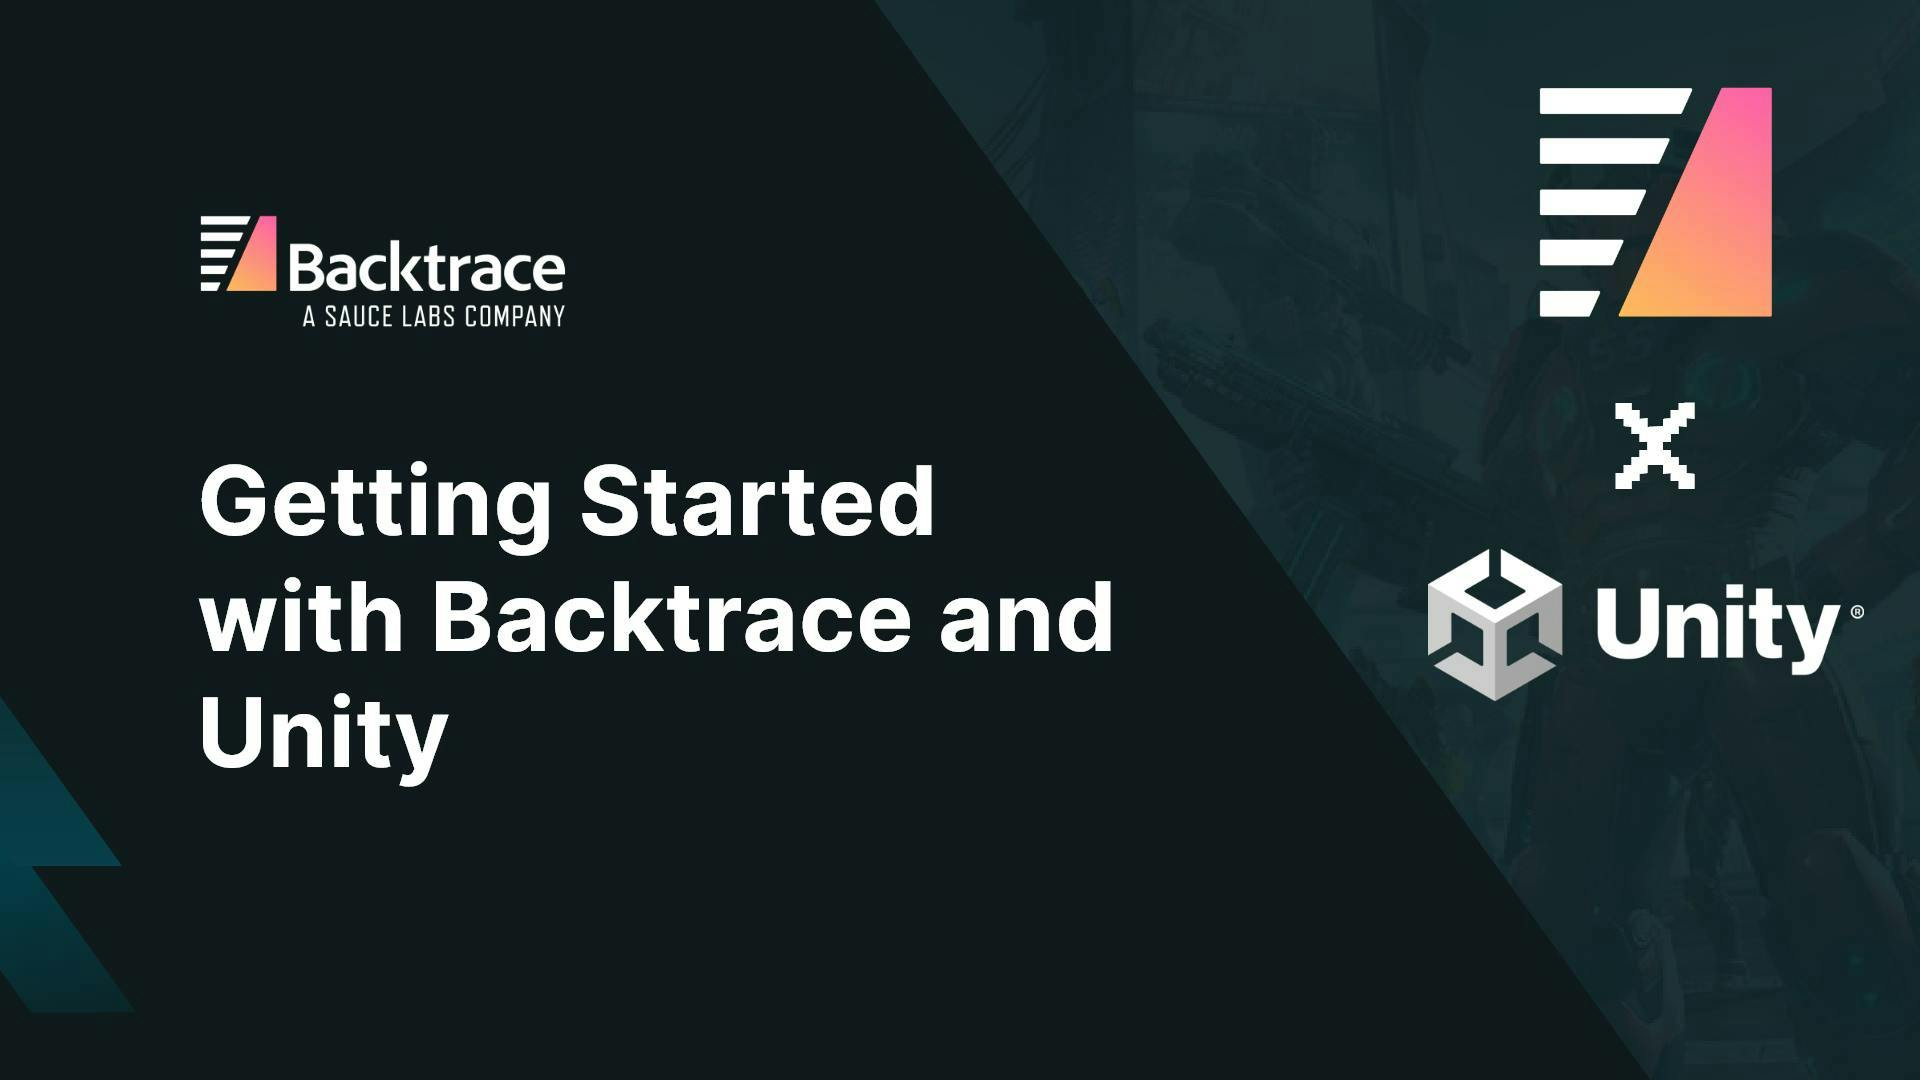 Getting Started with Backtrace and Unity